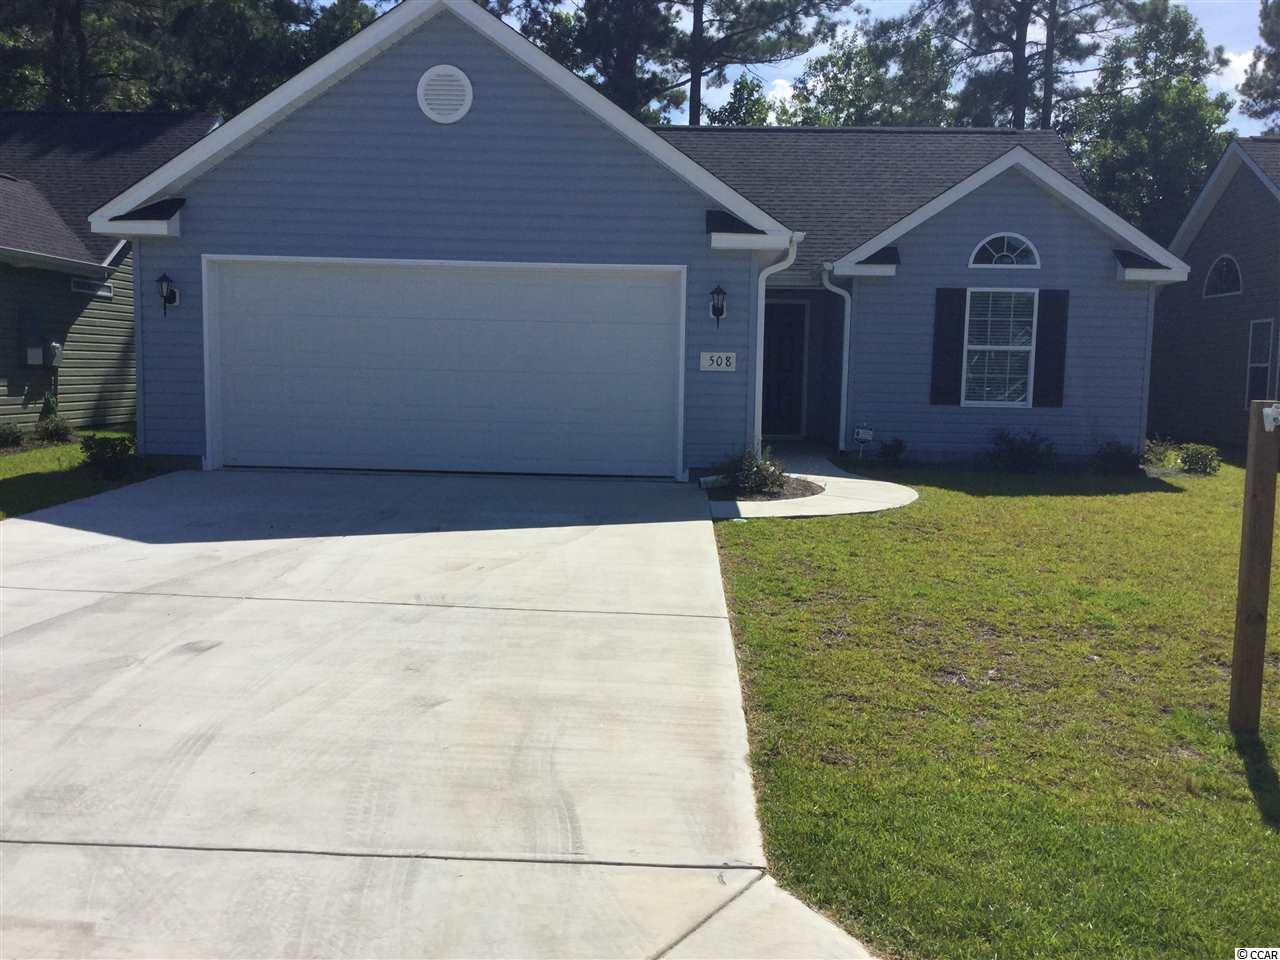 508 Easter Ct. Myrtle Beach, SC 29588